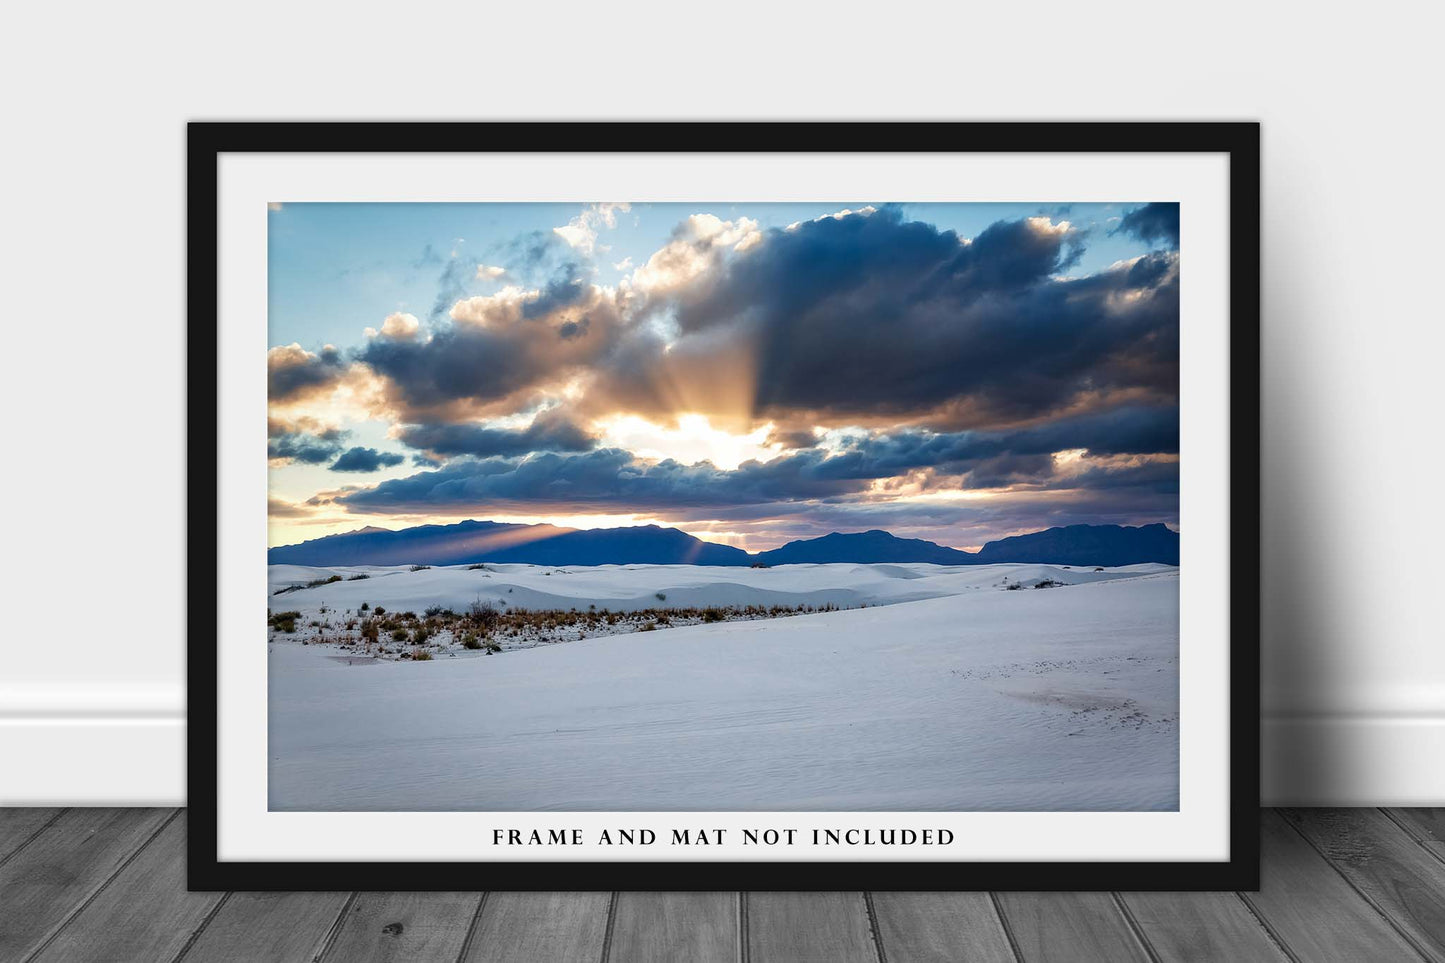 White Sands National Park Photography Print | Sunbeams Over Mountains Picture | Desert Wall Art | New Mexico Landscape Photo | Southwestern Decor | Not Framed